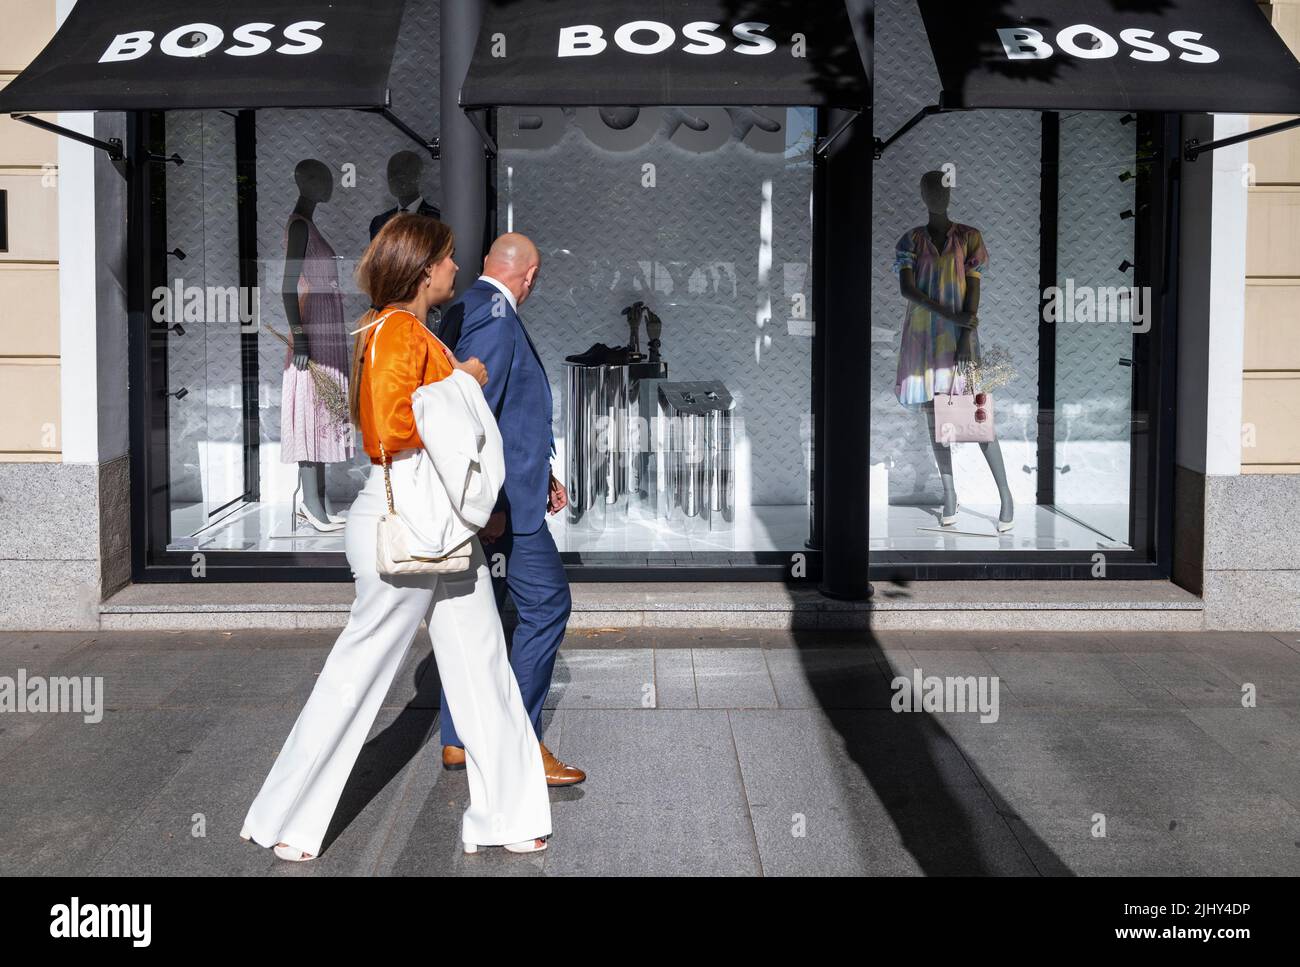 Hugo boss branding hi-res stock photography and images - Alamy